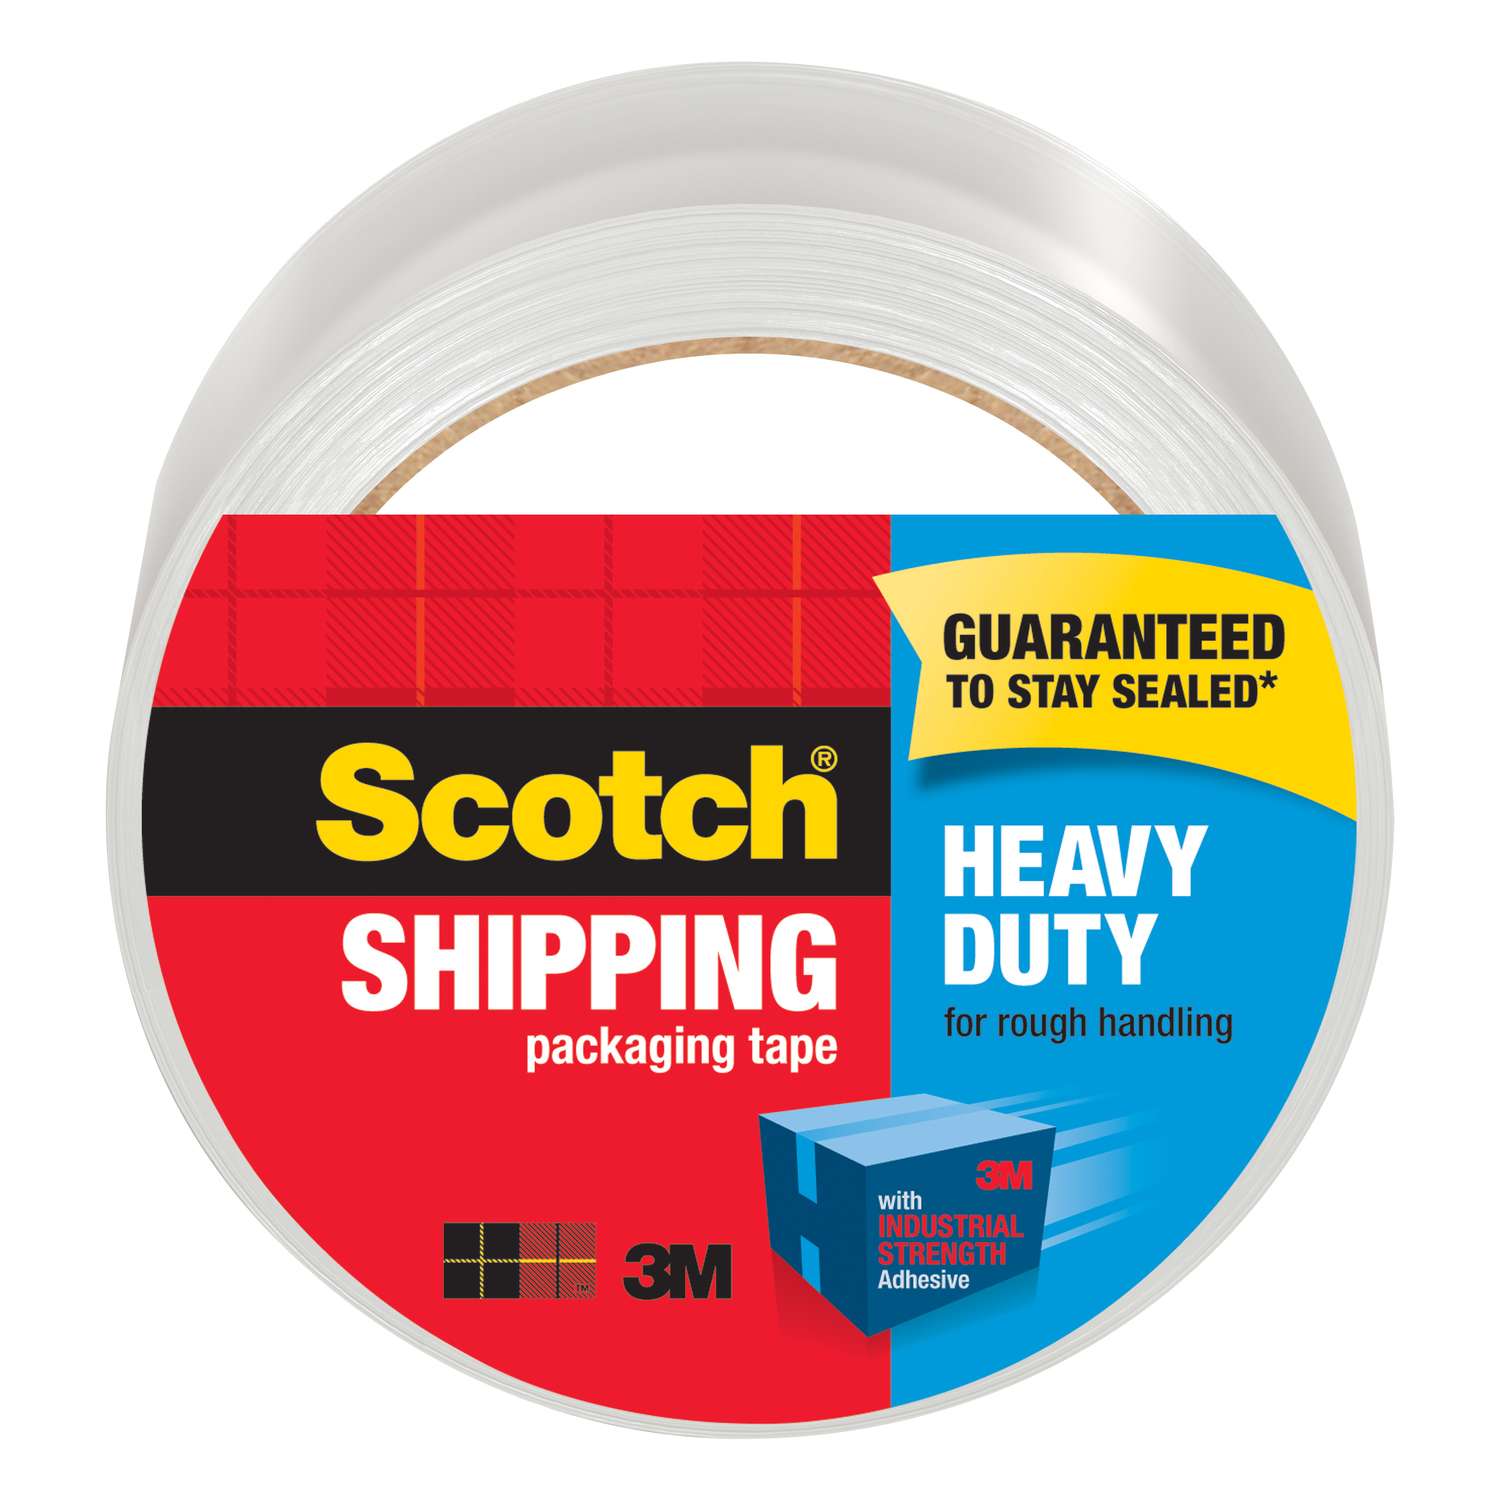 ✨NEW ✨ Mini Brands Surprise Series 5 Scotch Packing Shipping Tape Post Its